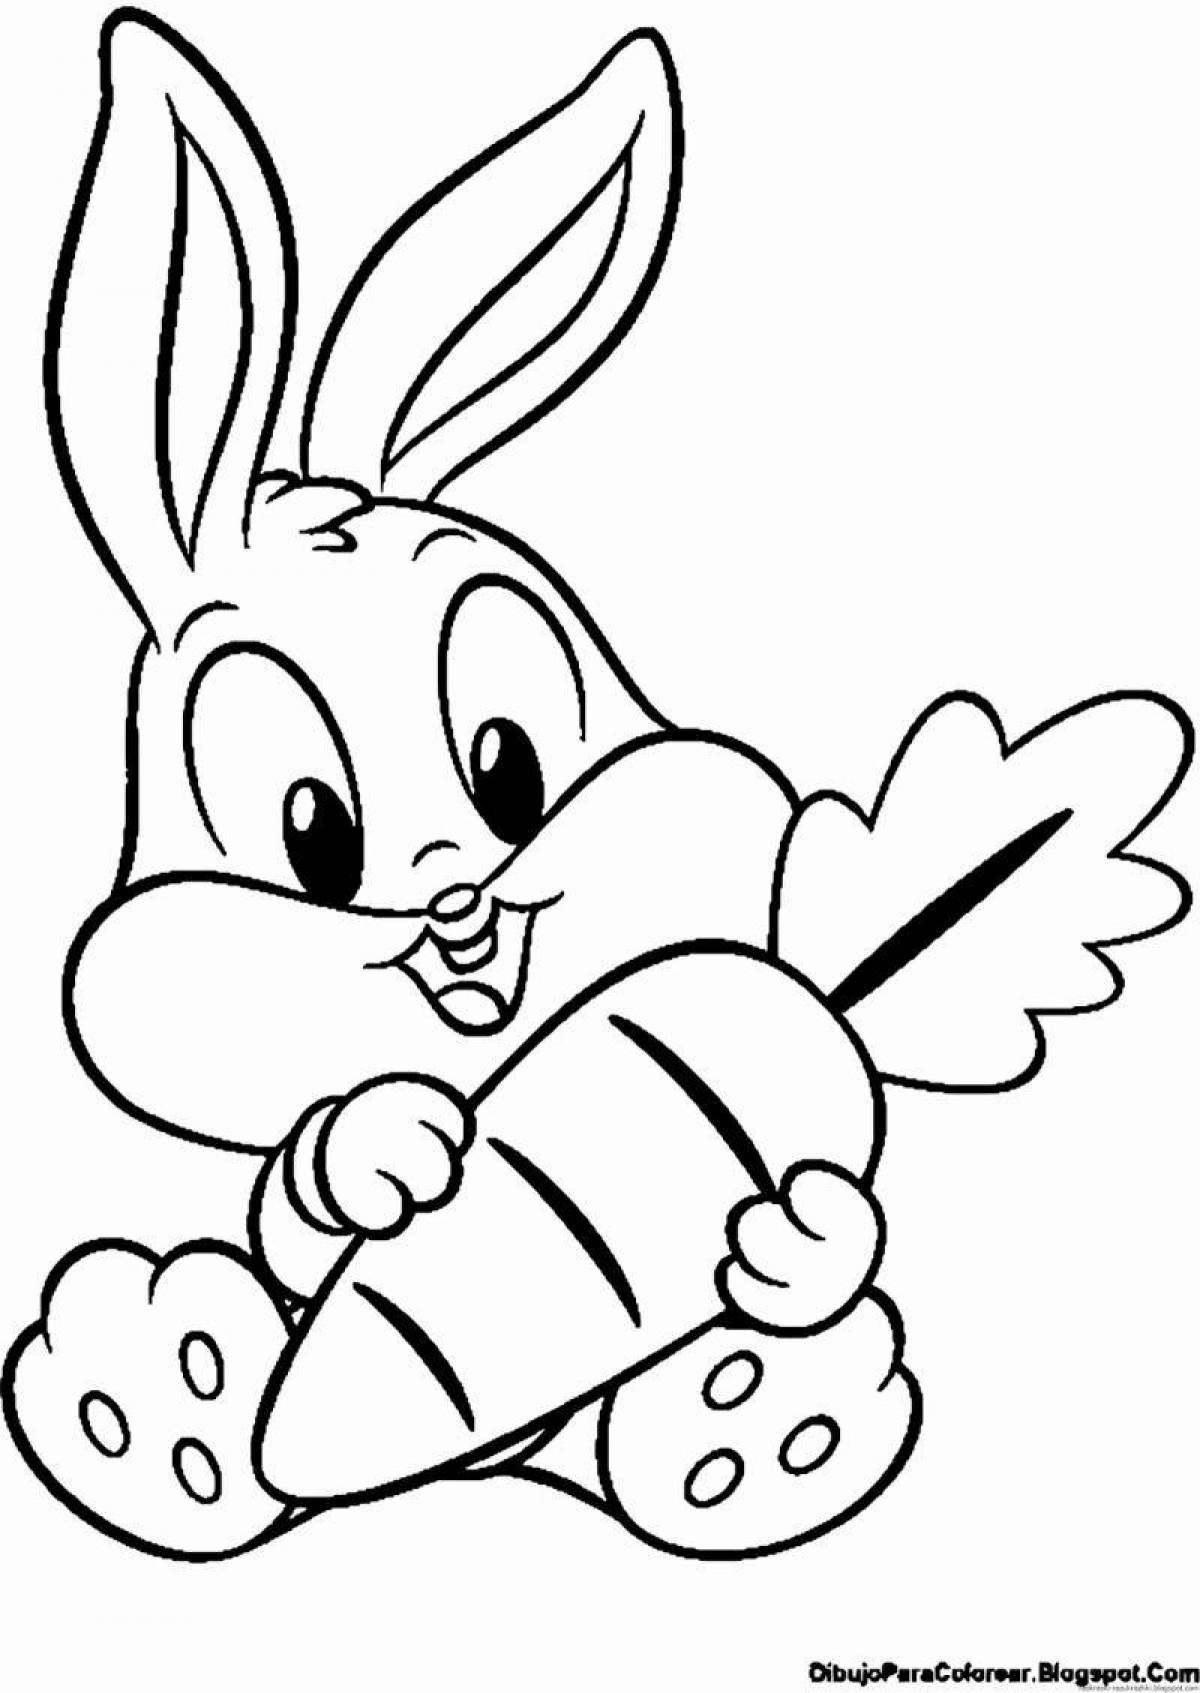 Radiant year of the rabbit coloring page